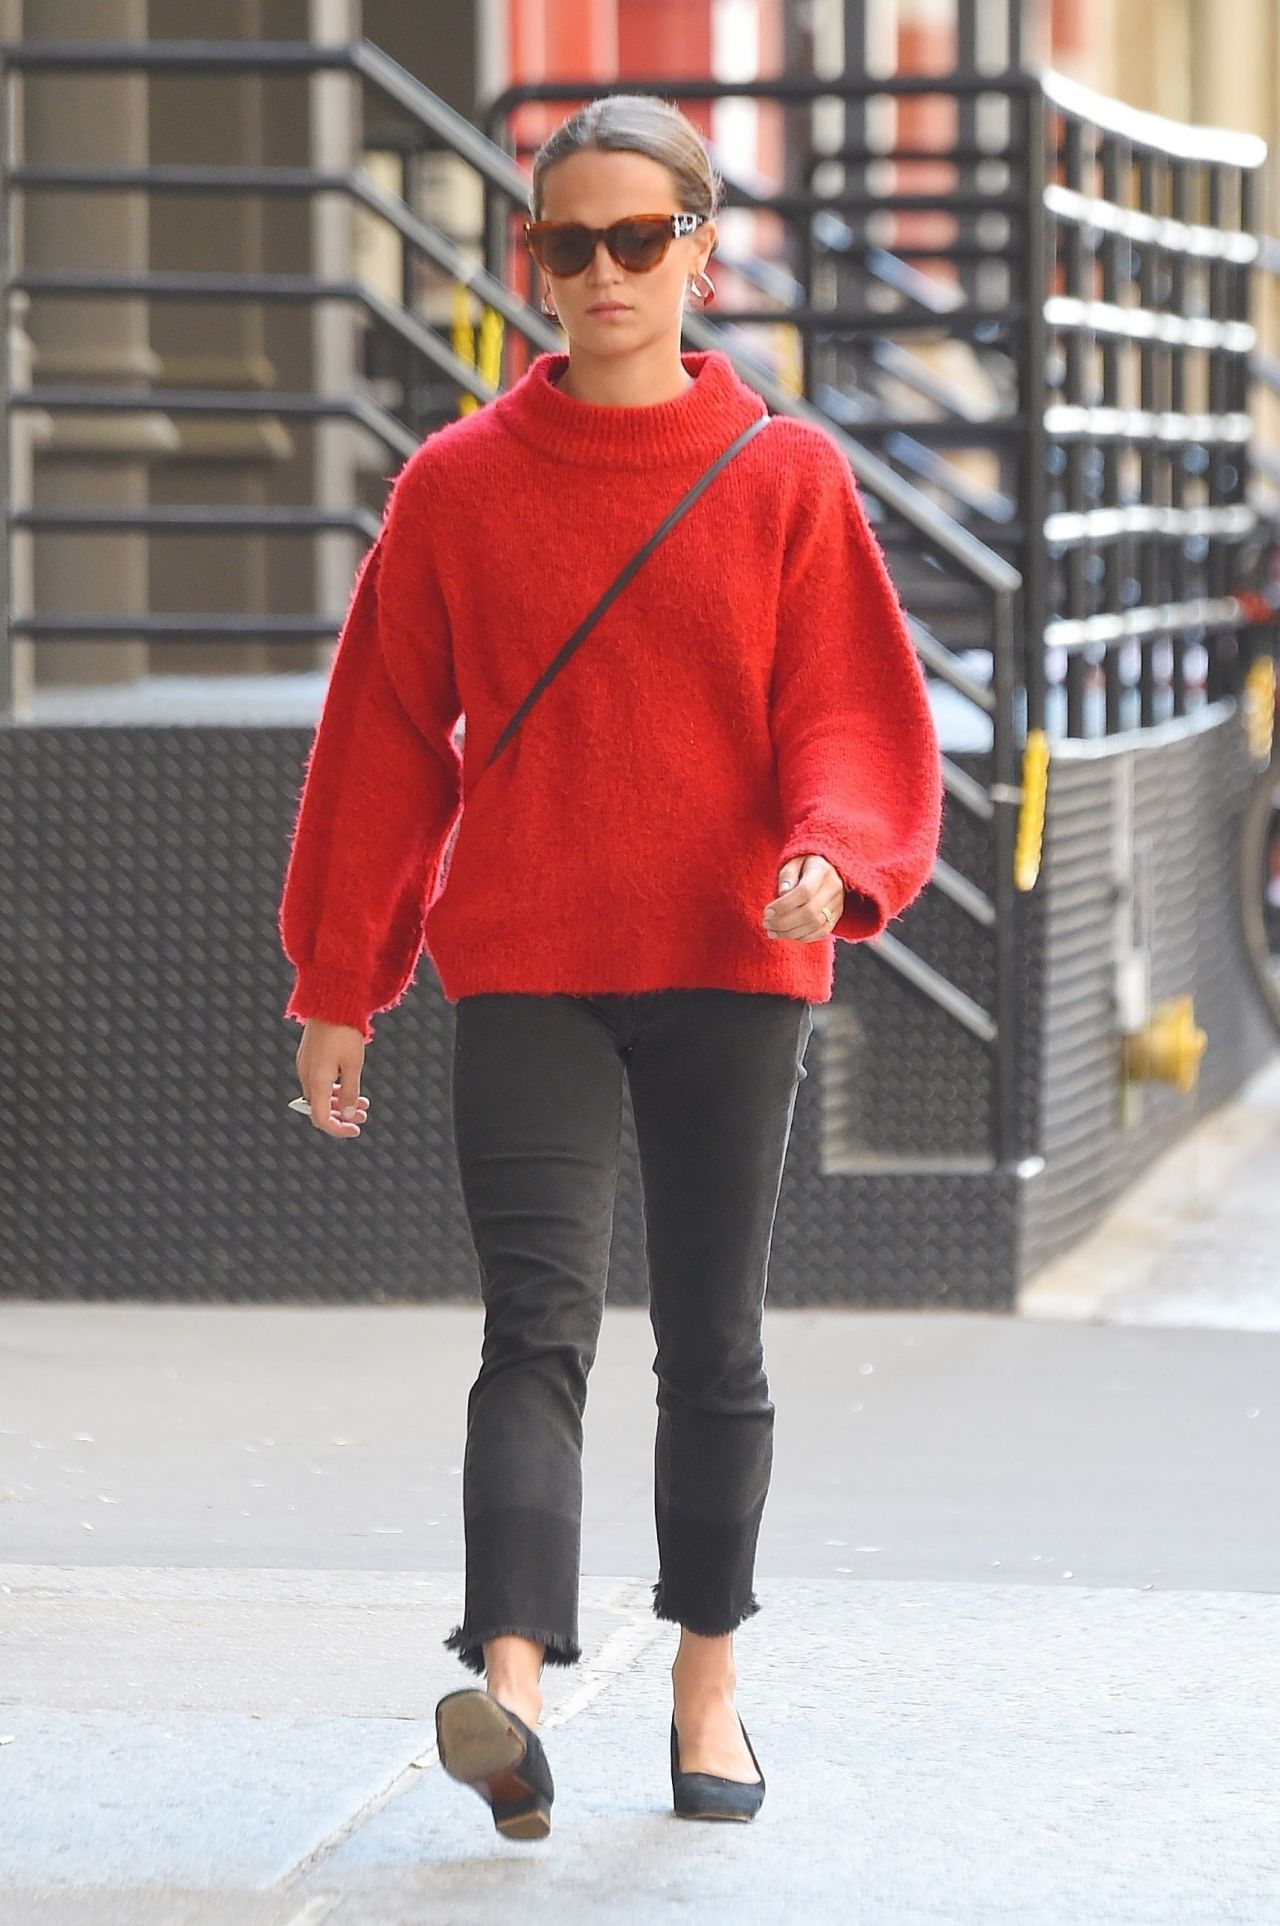 Alicia Vikander Keeps It Casual For Afternoon Outing in NYC: Photo 4289386, Alicia Vikander Photos